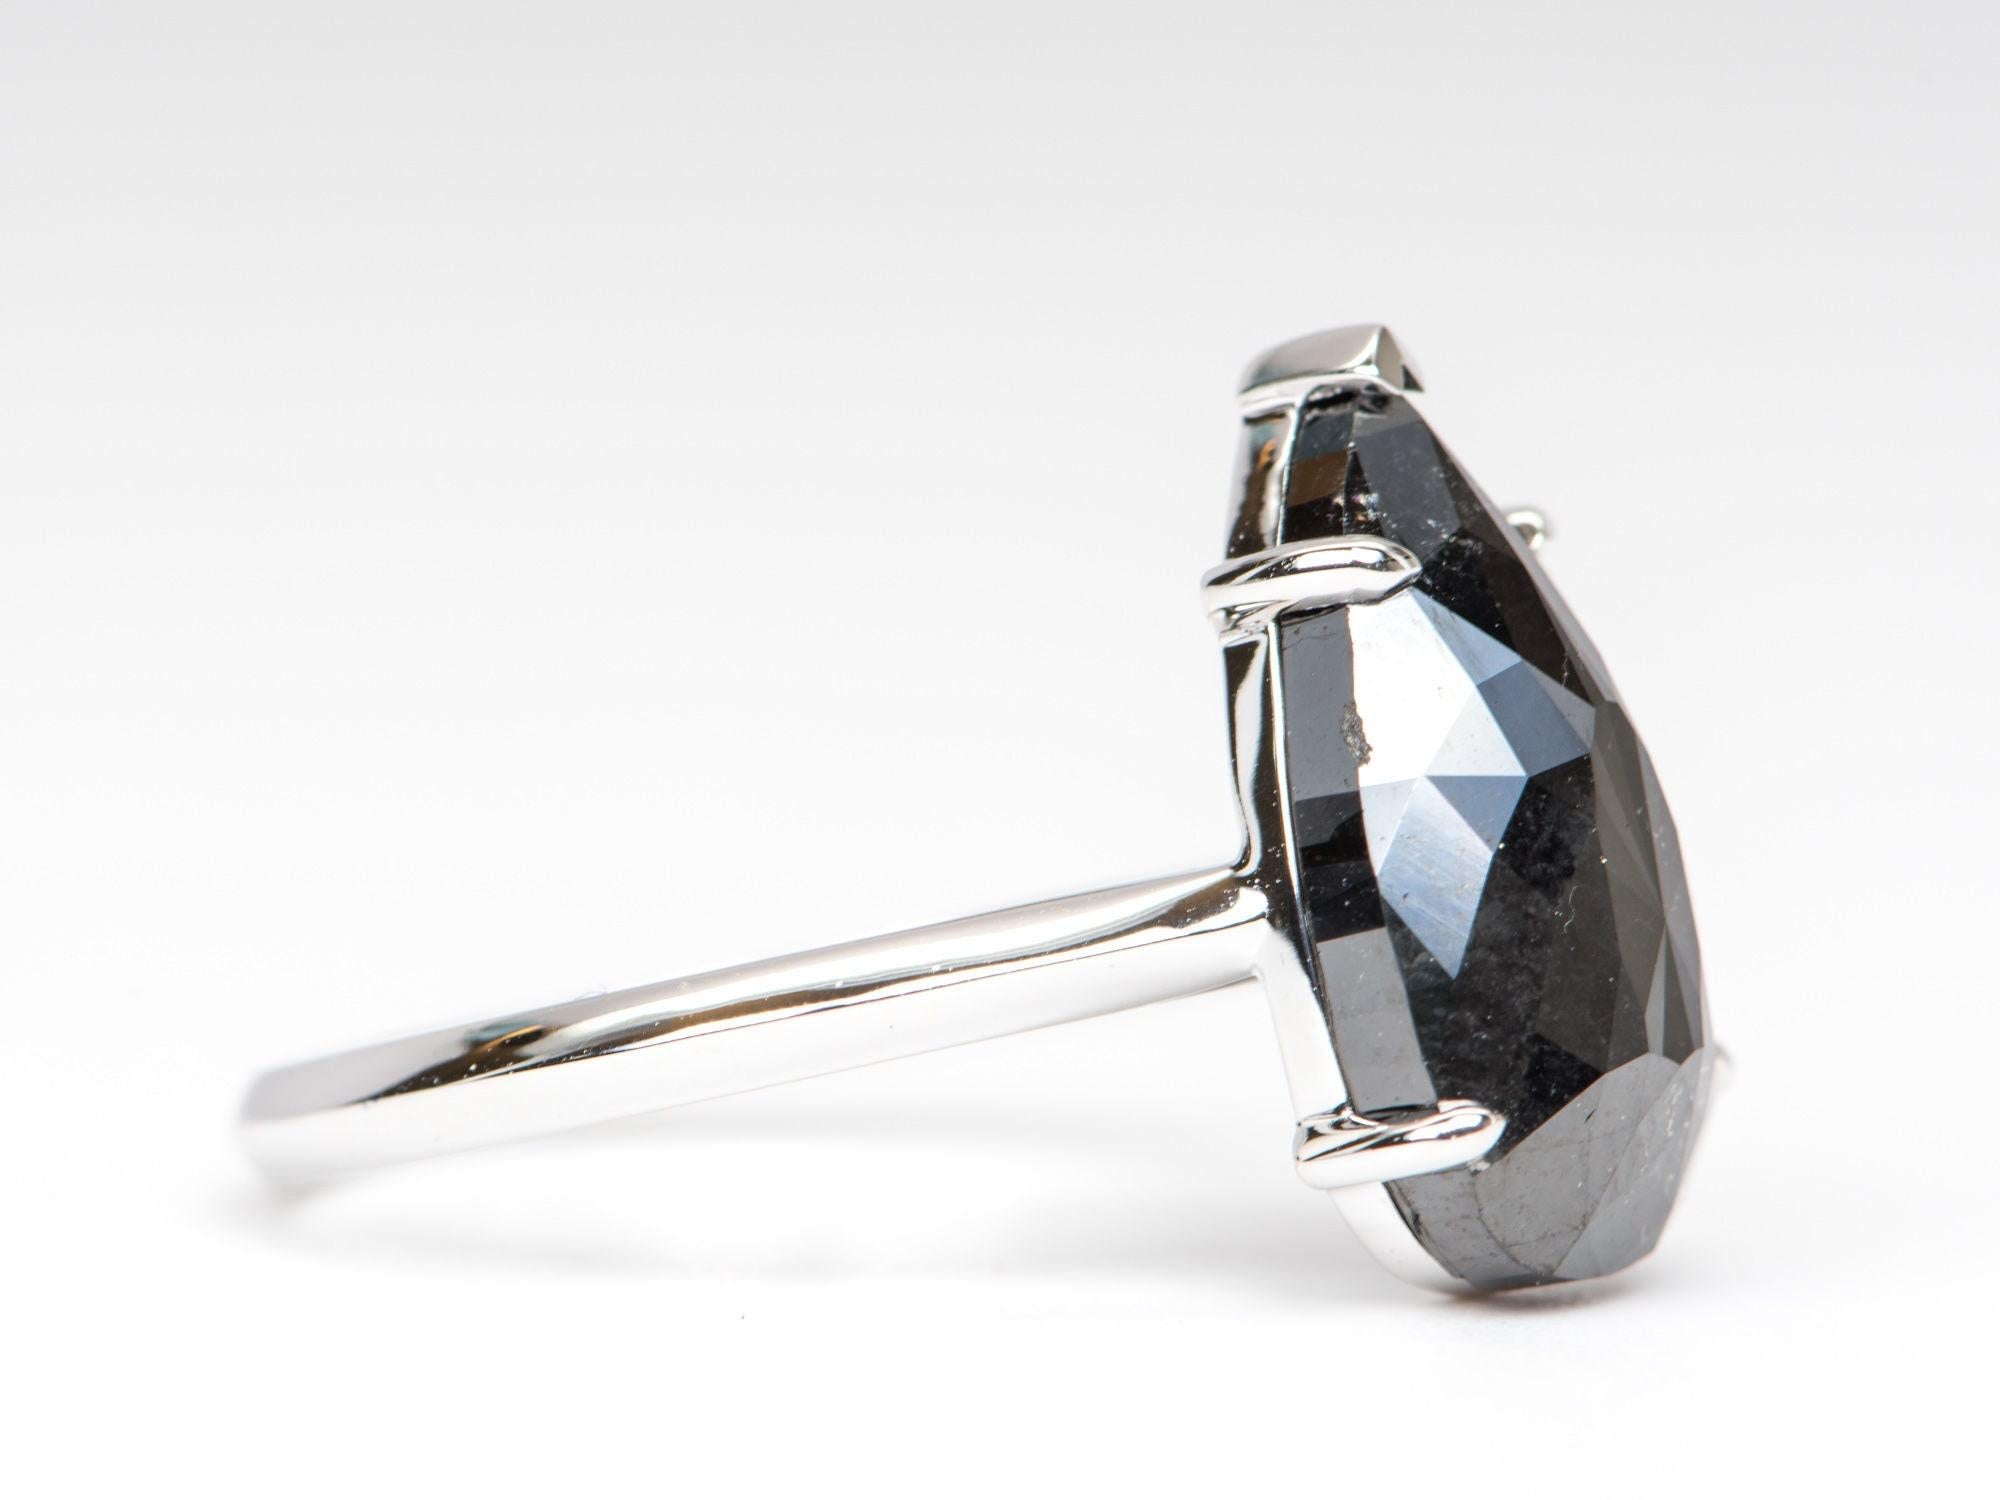 ♥ 5.37ct Elongated Black Diamond Engagement Ring 14K White Gold
♥ Solid 14k white gold ring set with a beautiful pear-shaped diamond
♥ Gorgeous black color!
♥ The item measures 16.5 mm in length, 10 mm in width, and stands 7.9 mm from the finger

♥